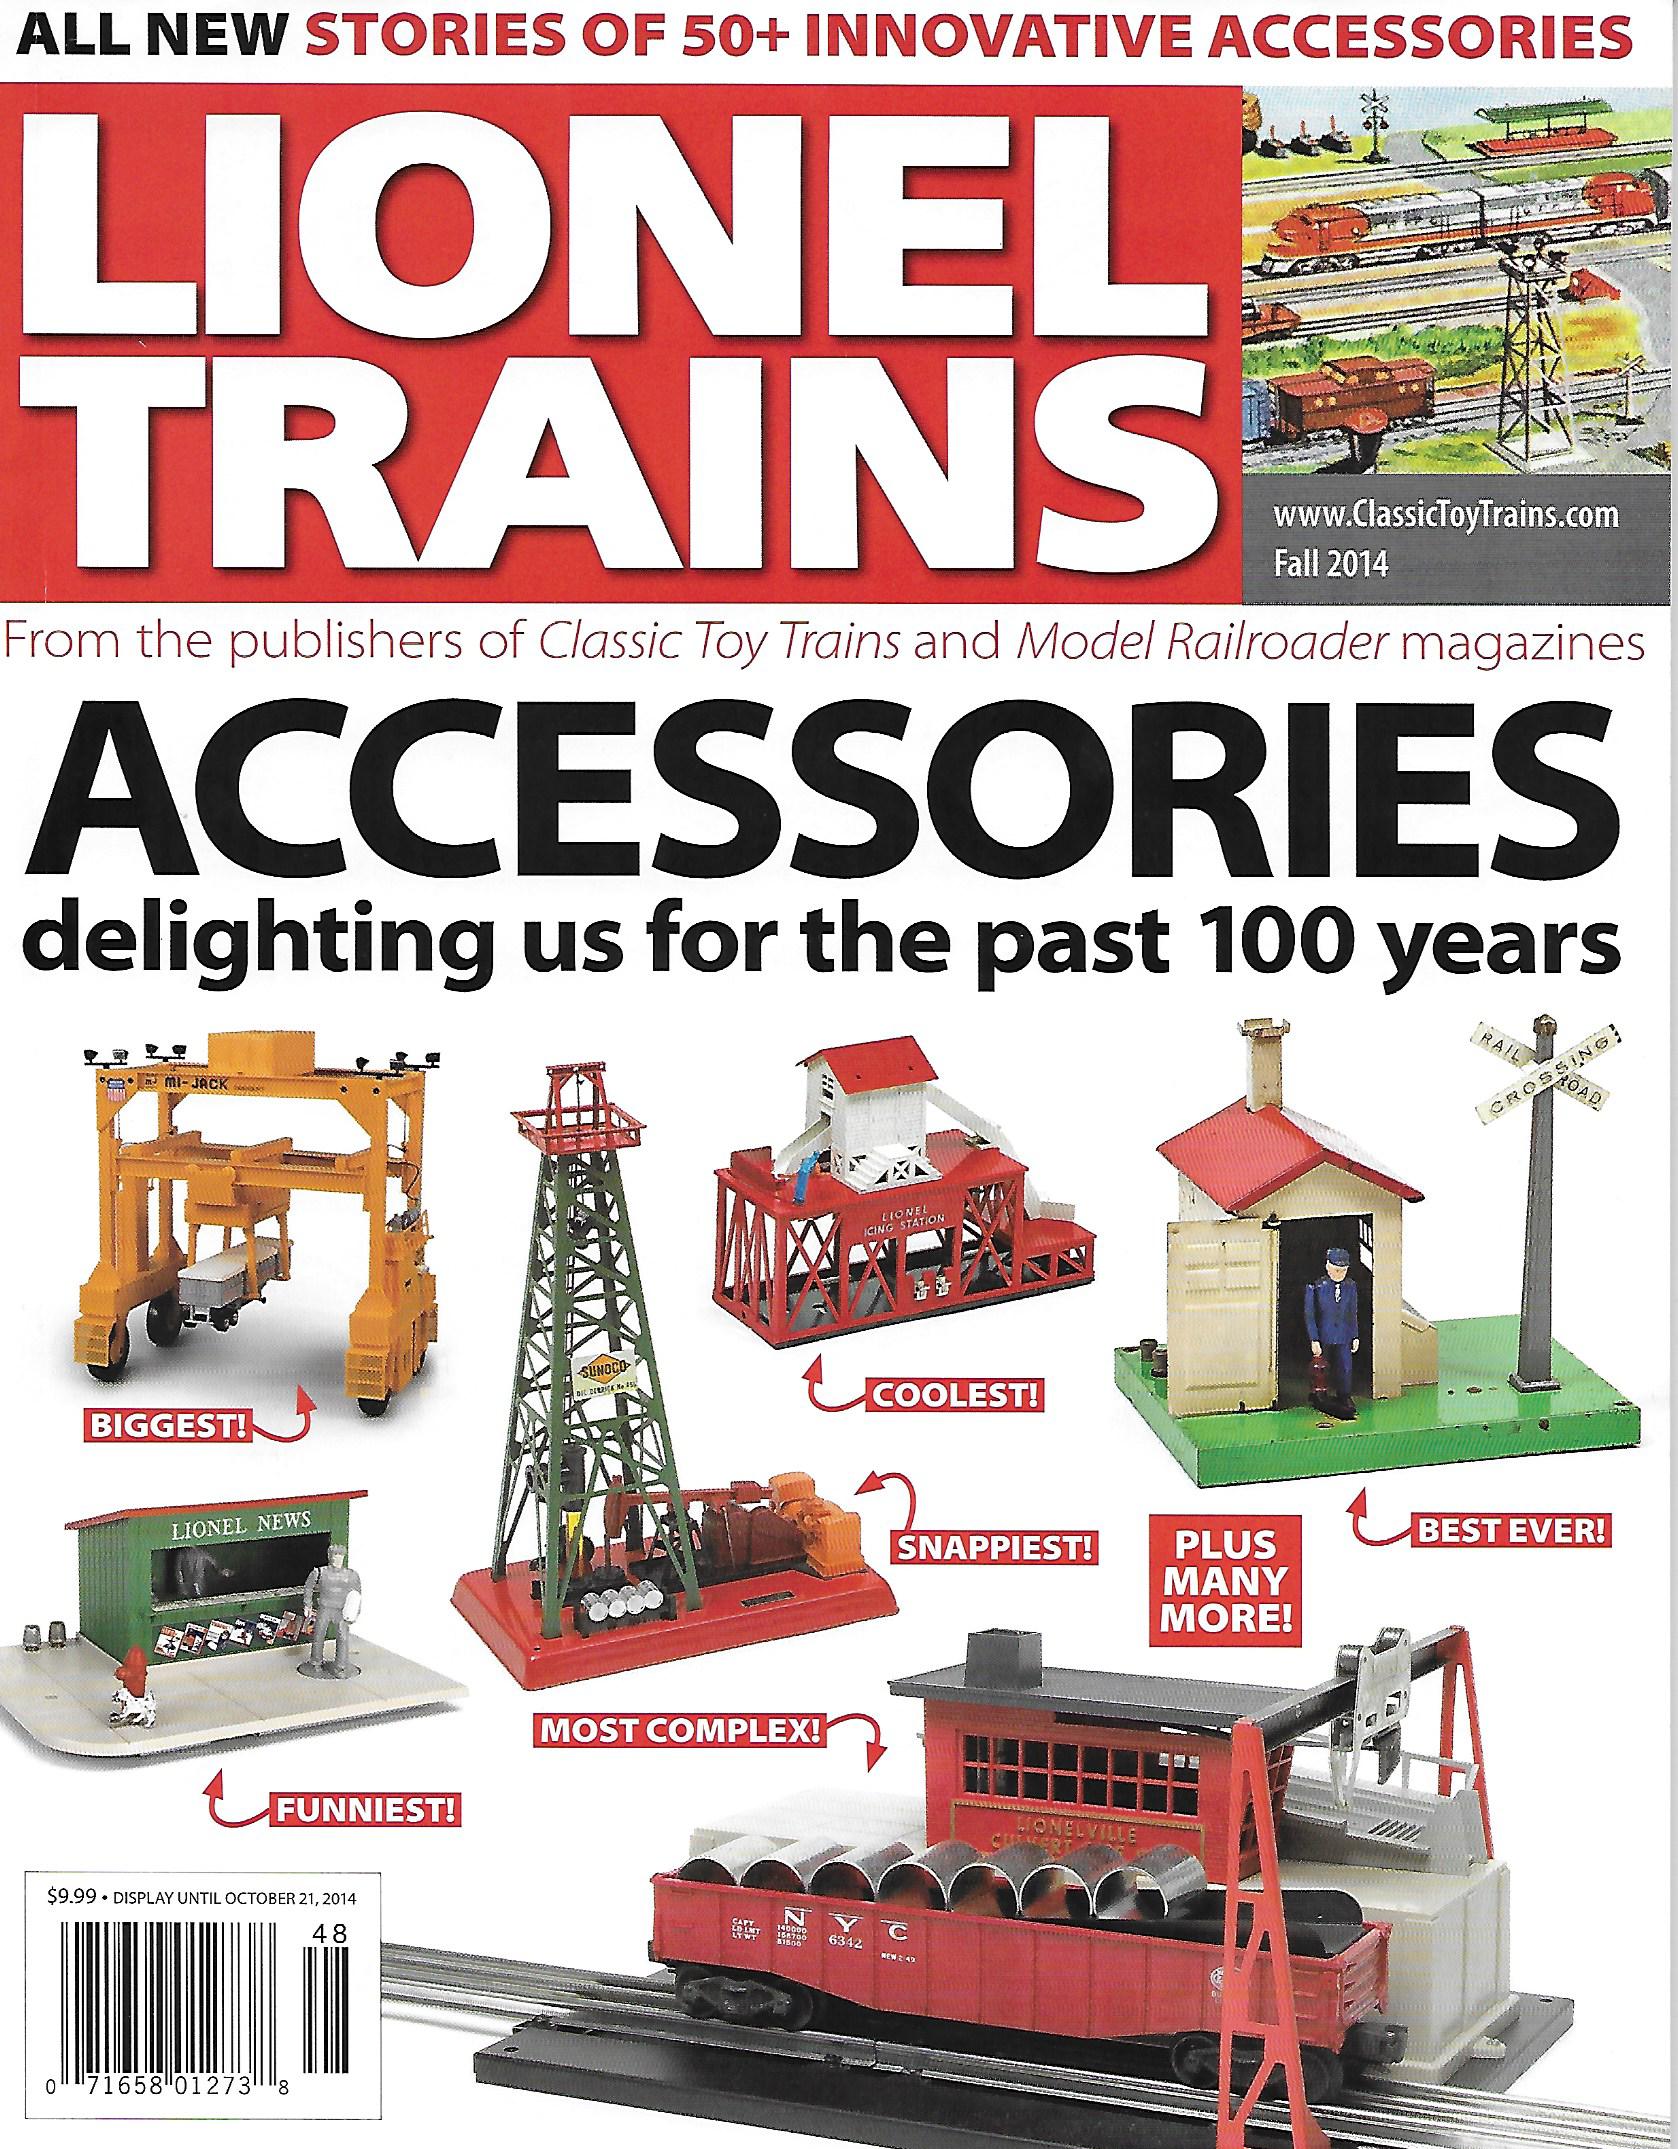 Lionel Trains Accessories (Classic Toy Train Magazine Special Issue) image